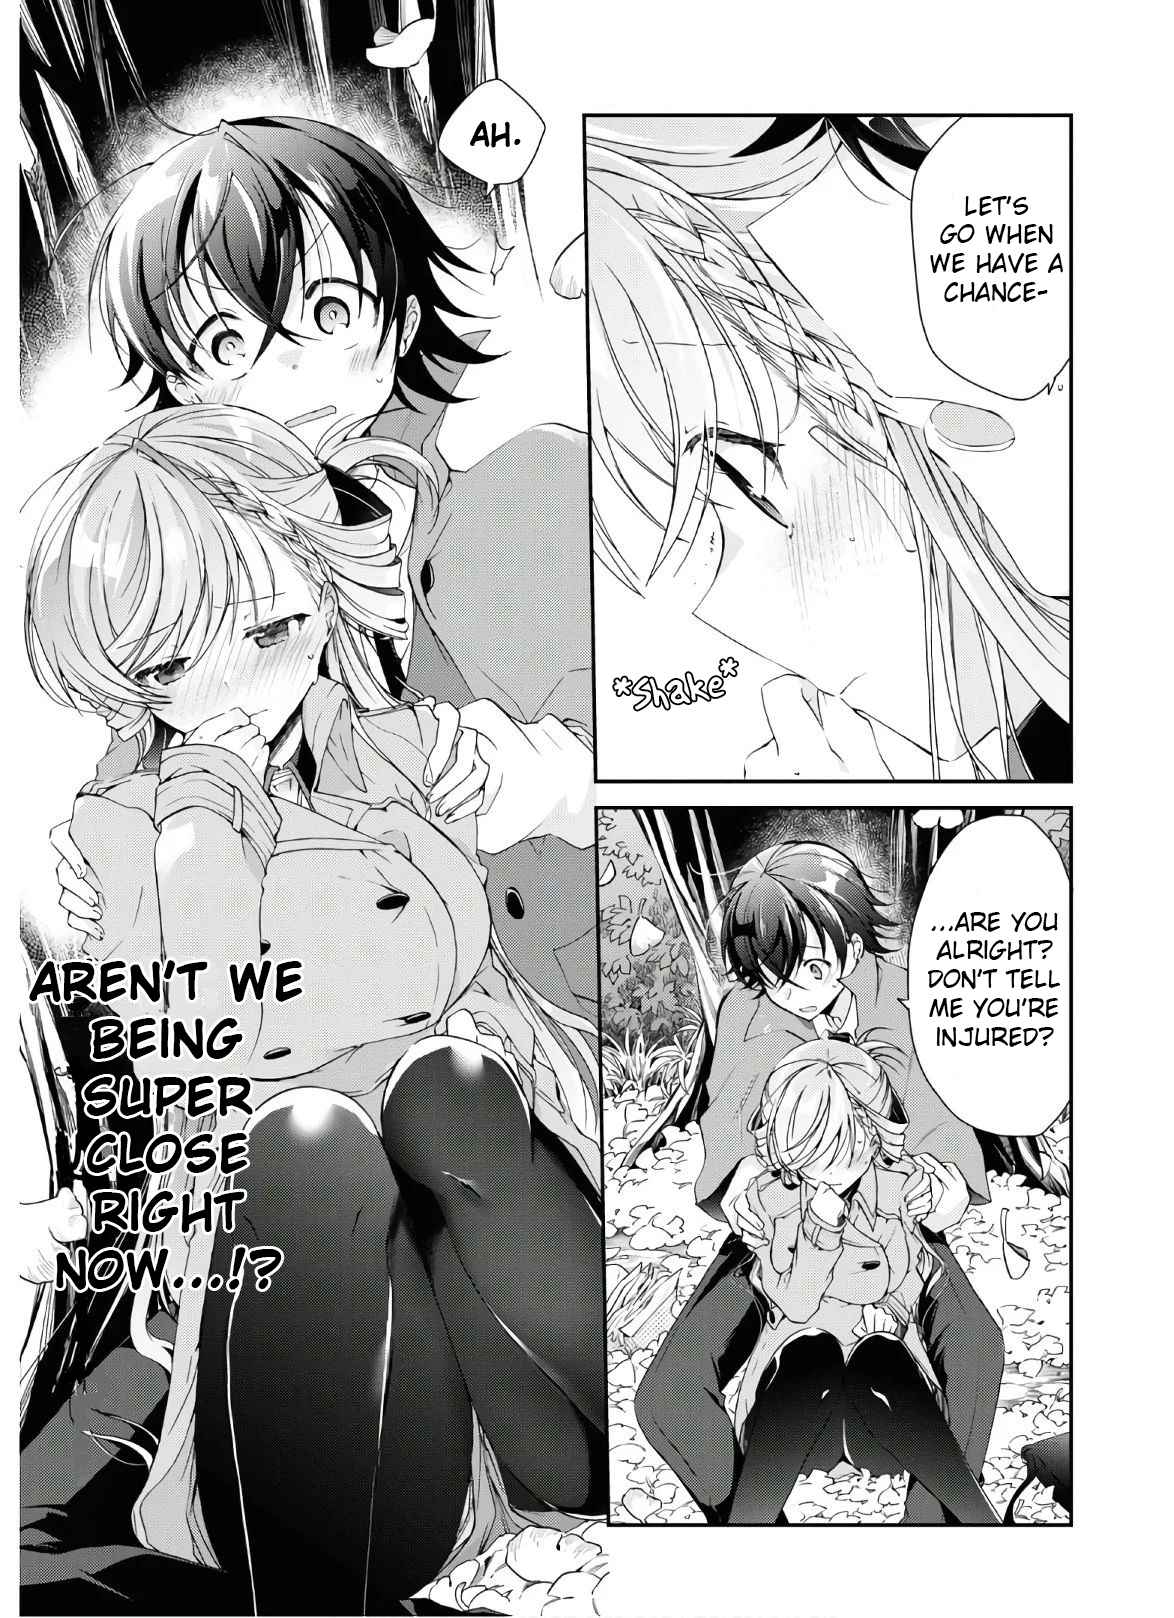 Isshiki-san Wants to Know About Love. - chapter 7 - #3